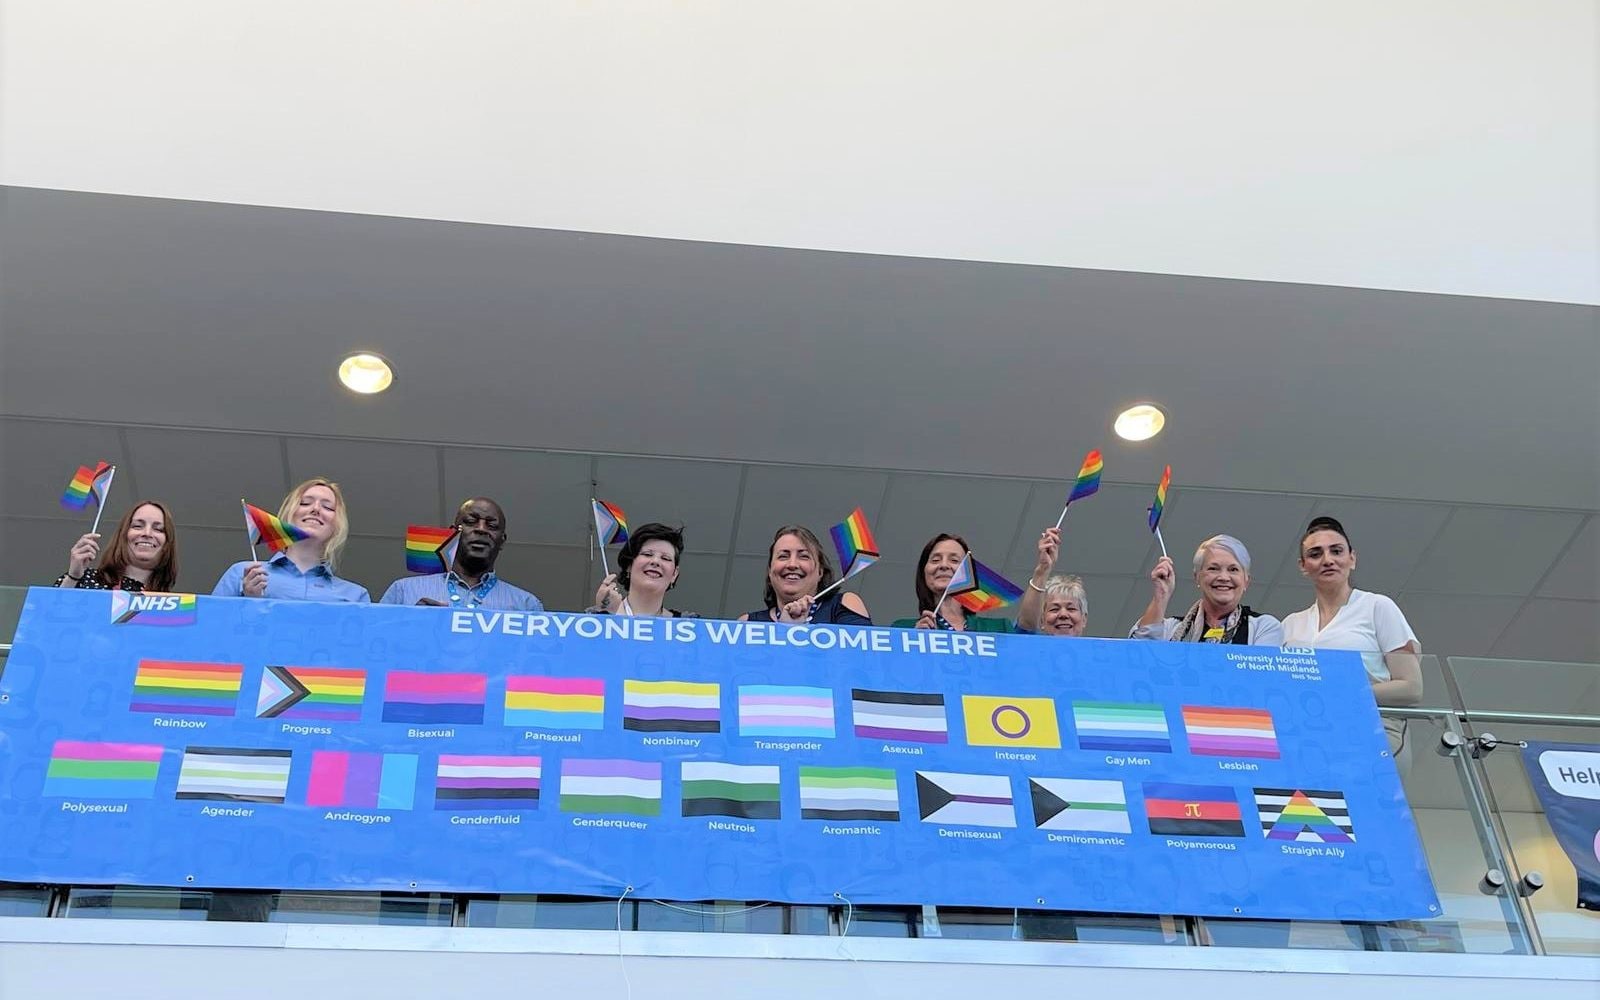 nhs mocked for ‘woke’ welcome banner with 21 genders and sexualities on it